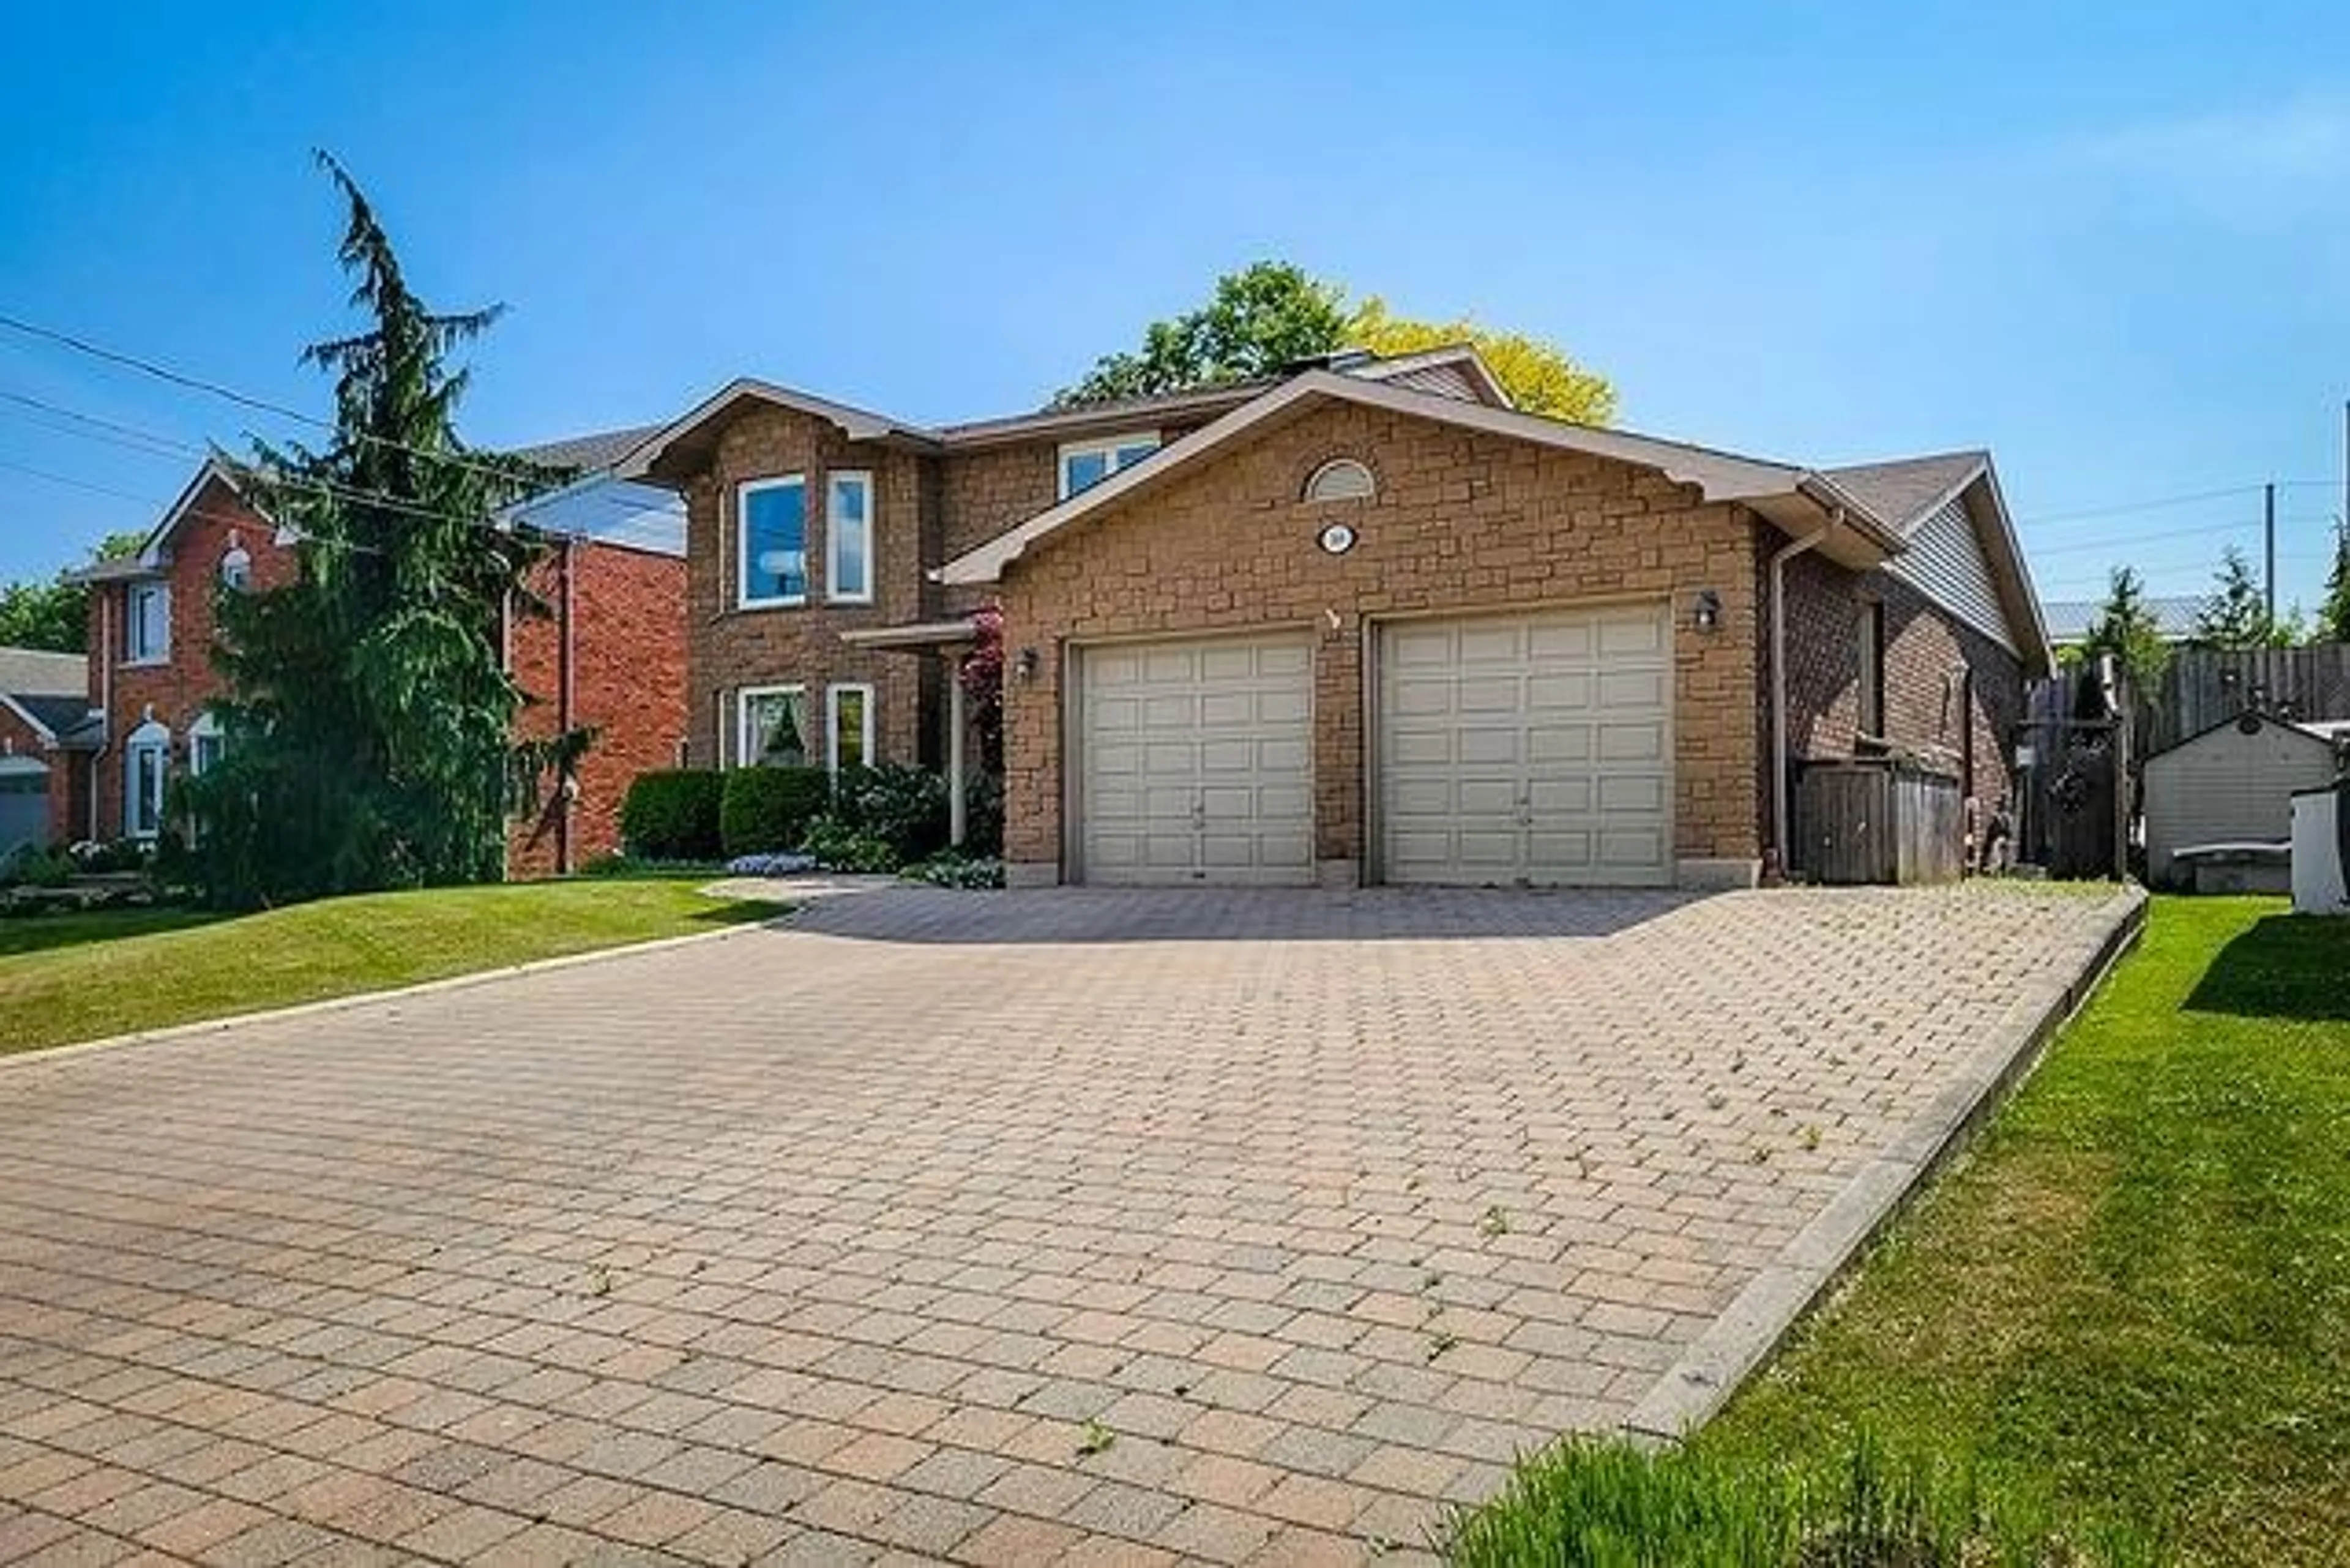 Home with brick exterior material for 369 HALLER Pl, Haldimand County Ontario N3W 1E2